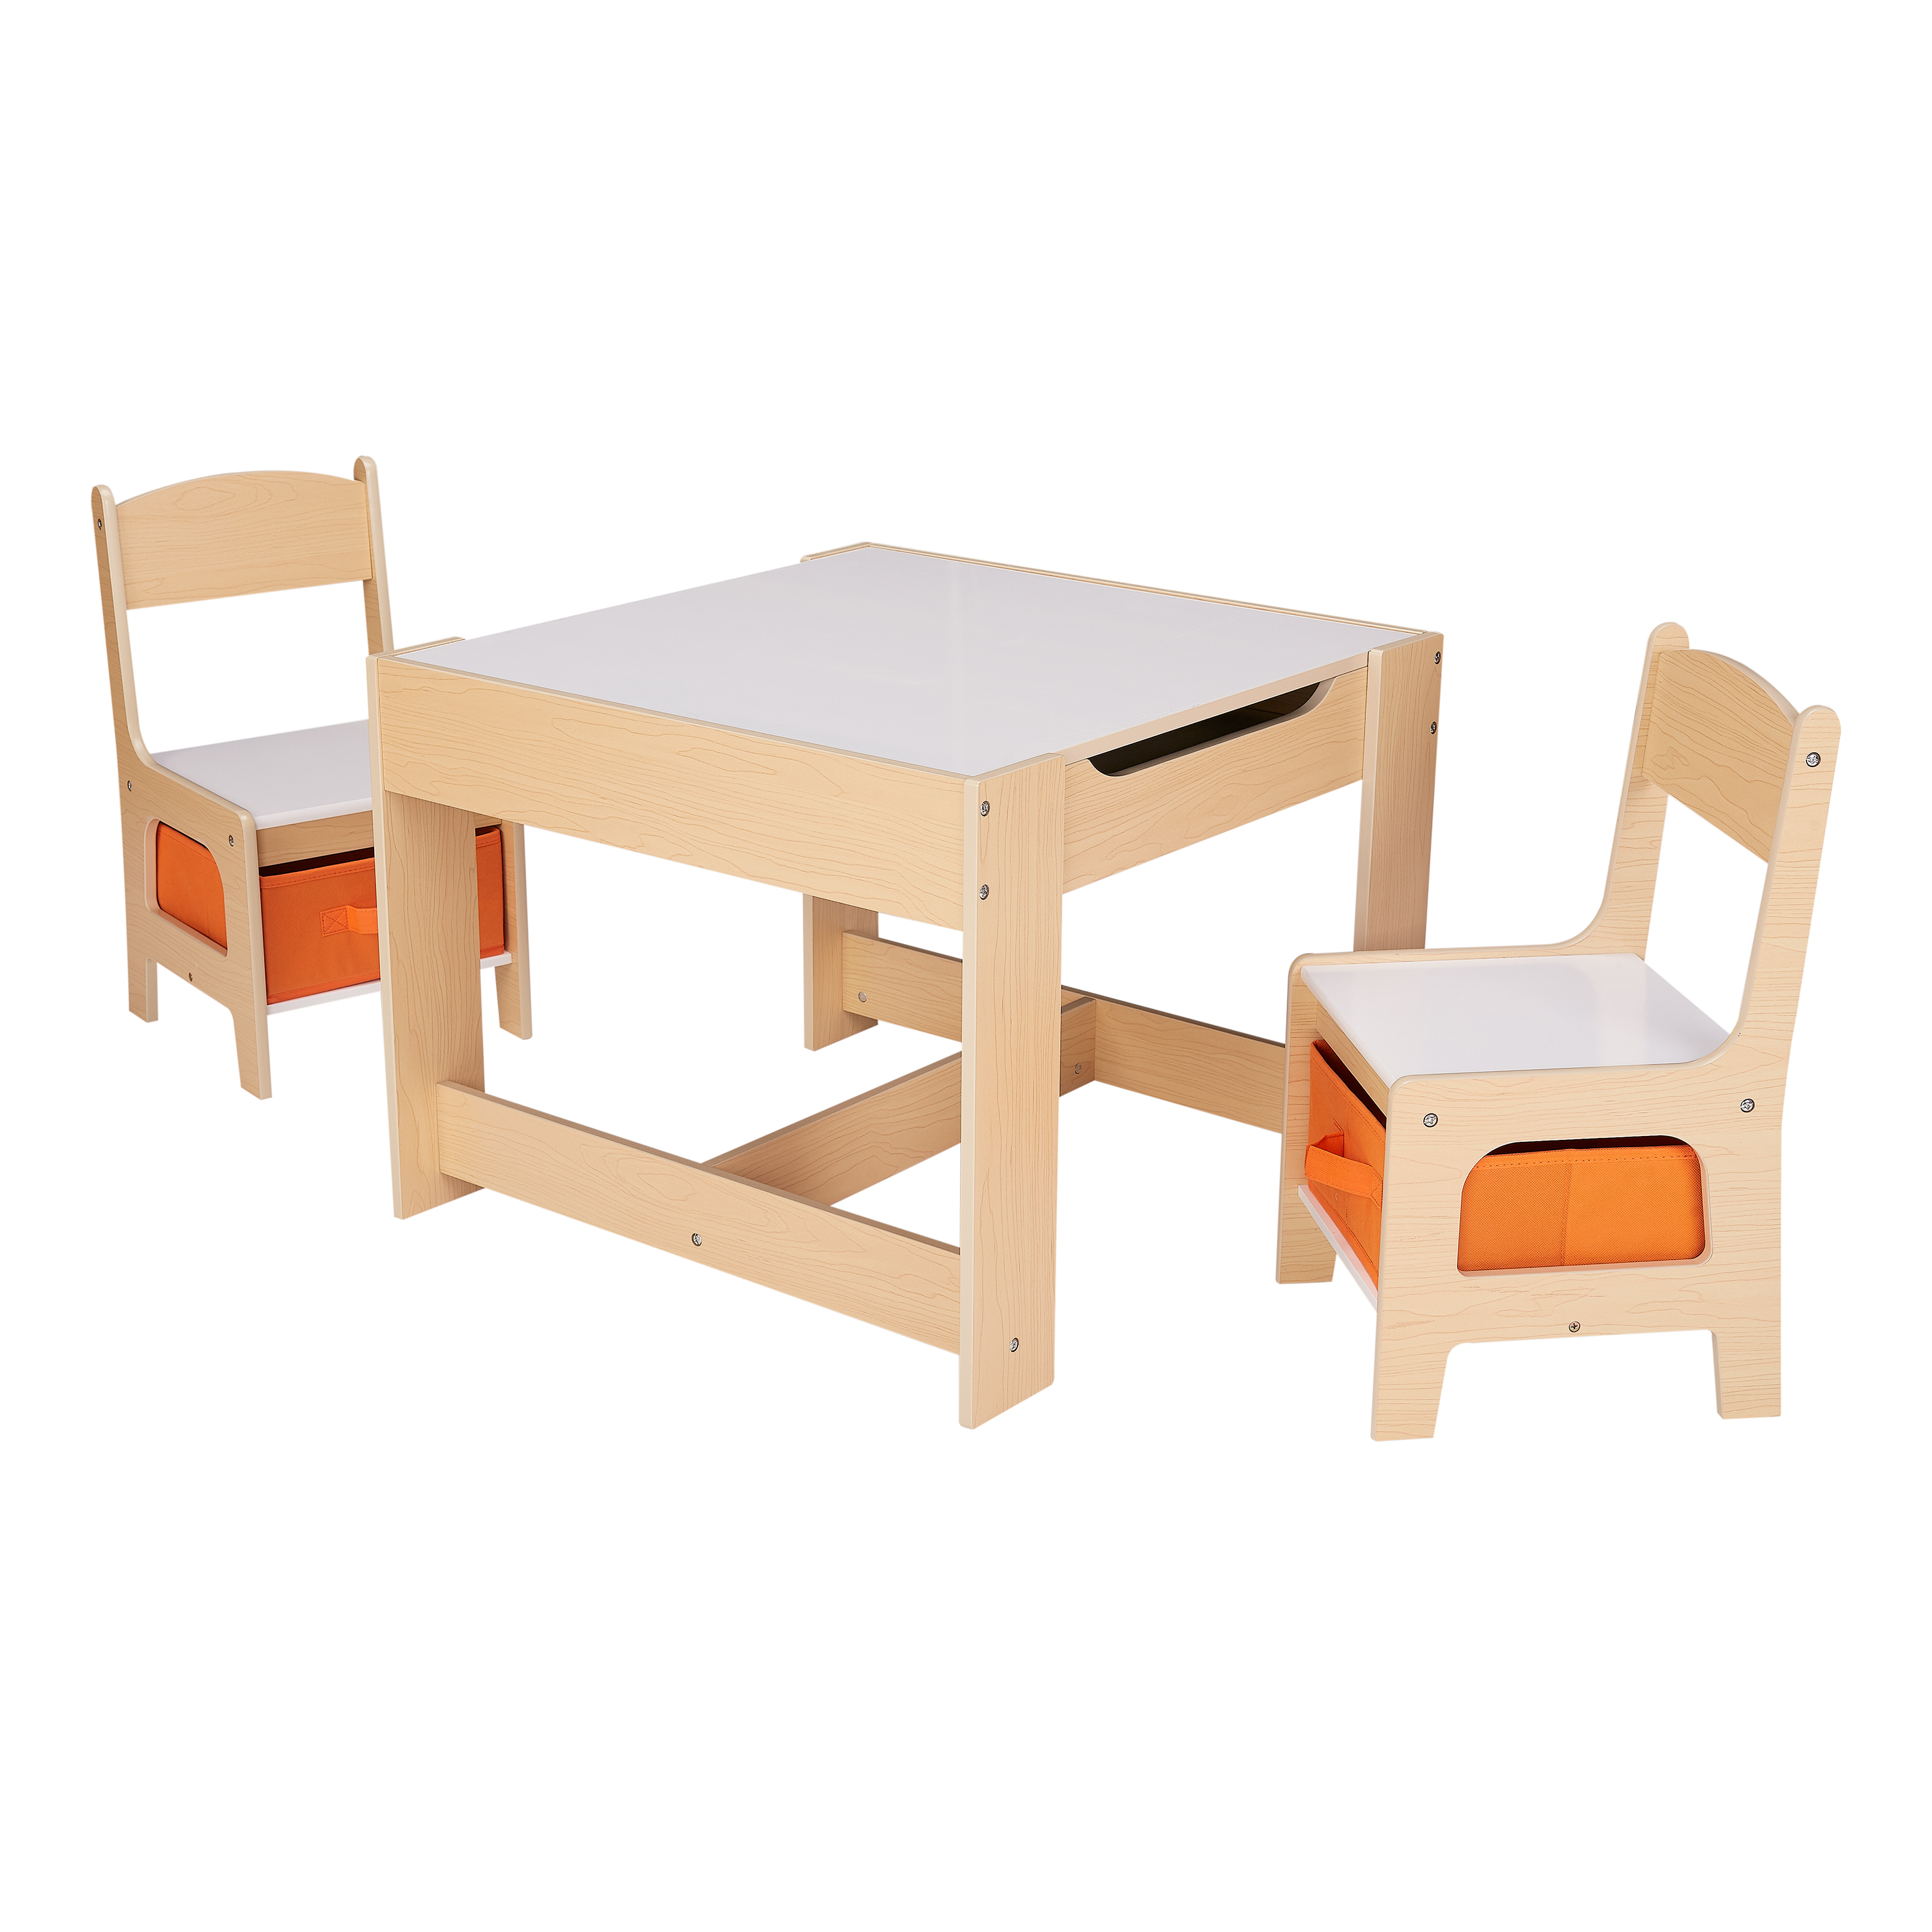 Senda Kids 3 Piece Wooden Storage Table and Chairs Set, White and Natural, Ages 3-7 - image 1 of 8